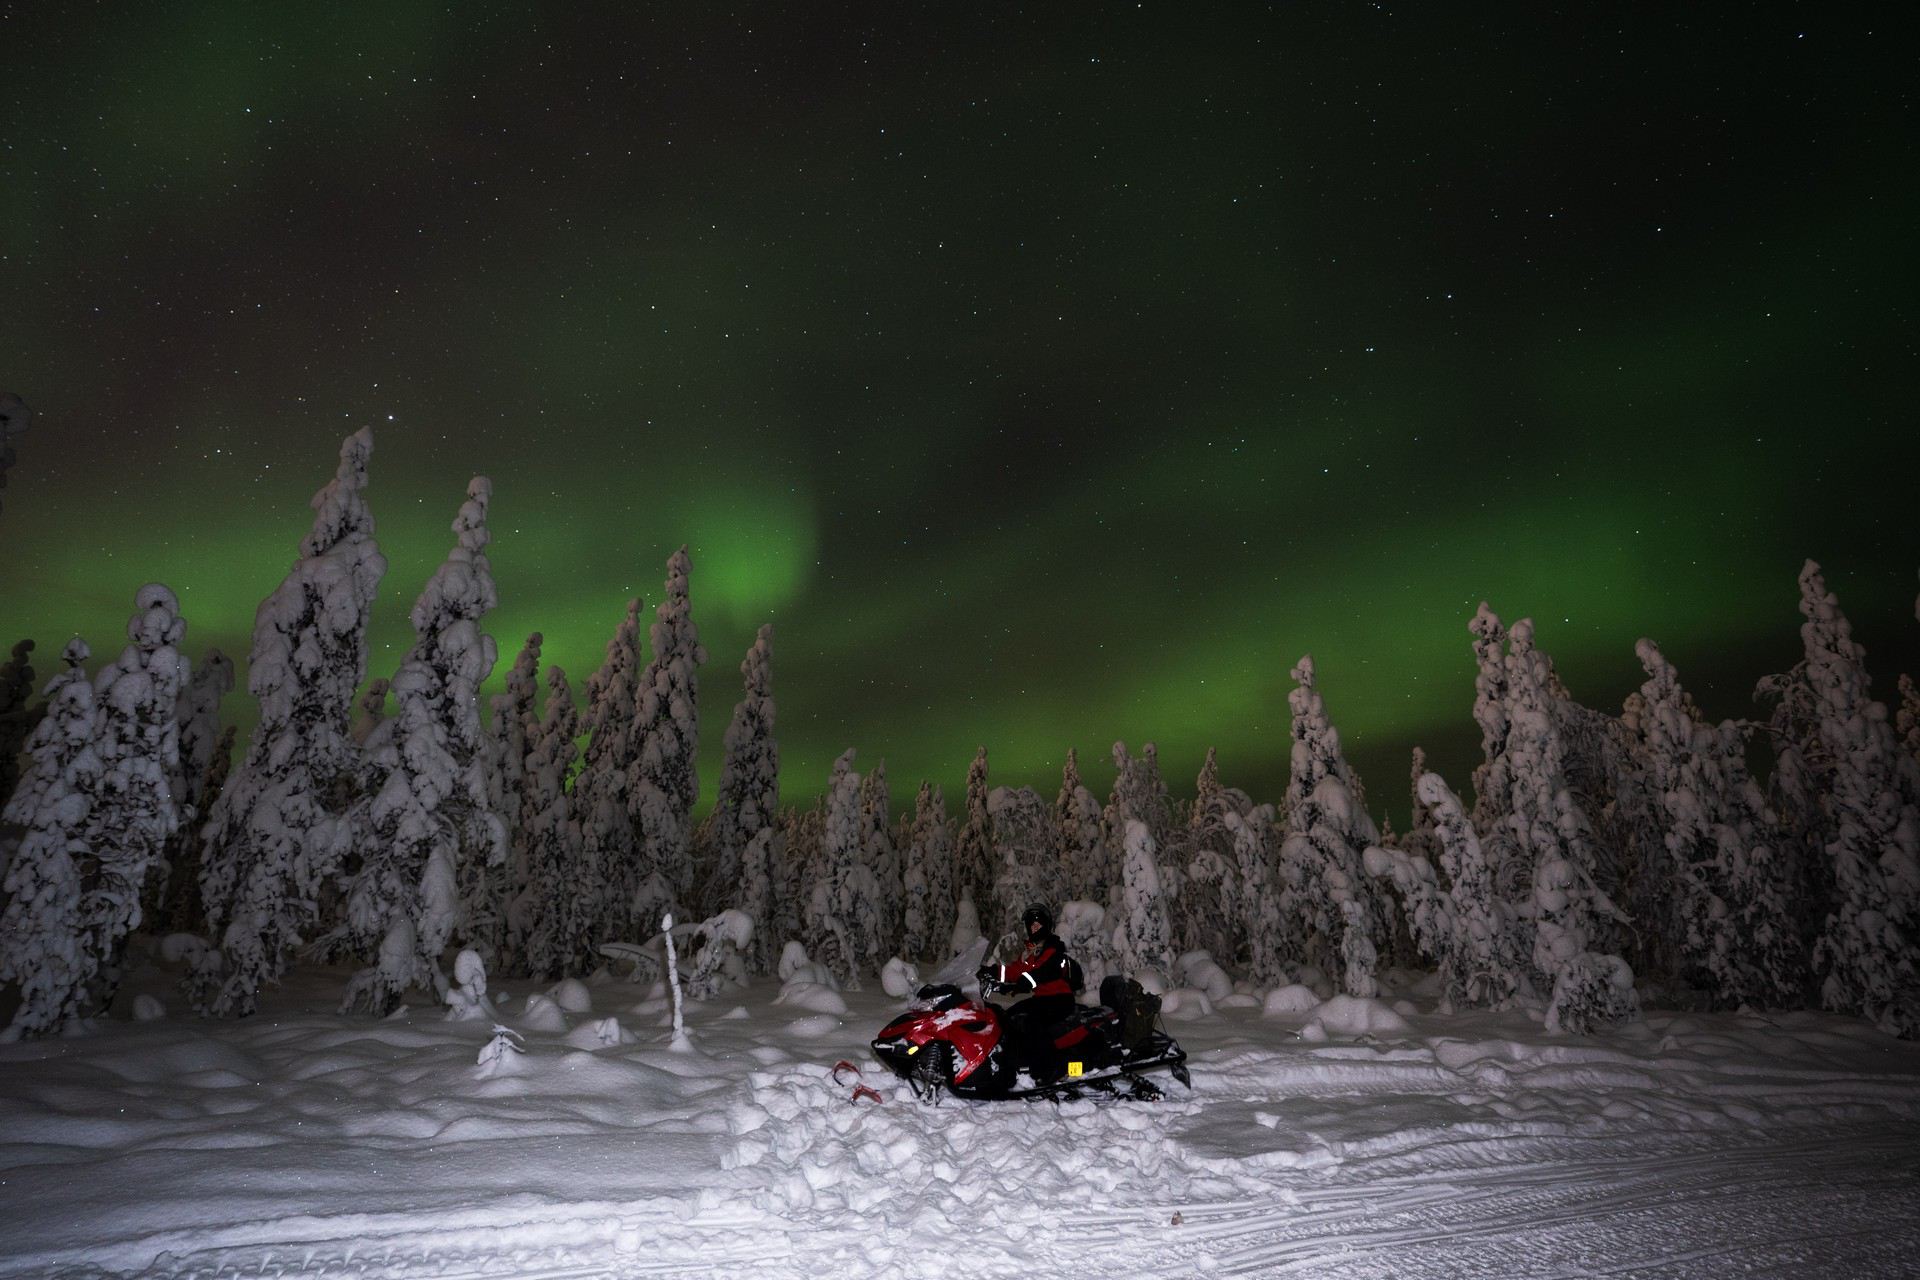 Sister on a snow mobile and the northern lights and snow covered trees in Rovaniemi, Finland. Christmas Day in Lapland